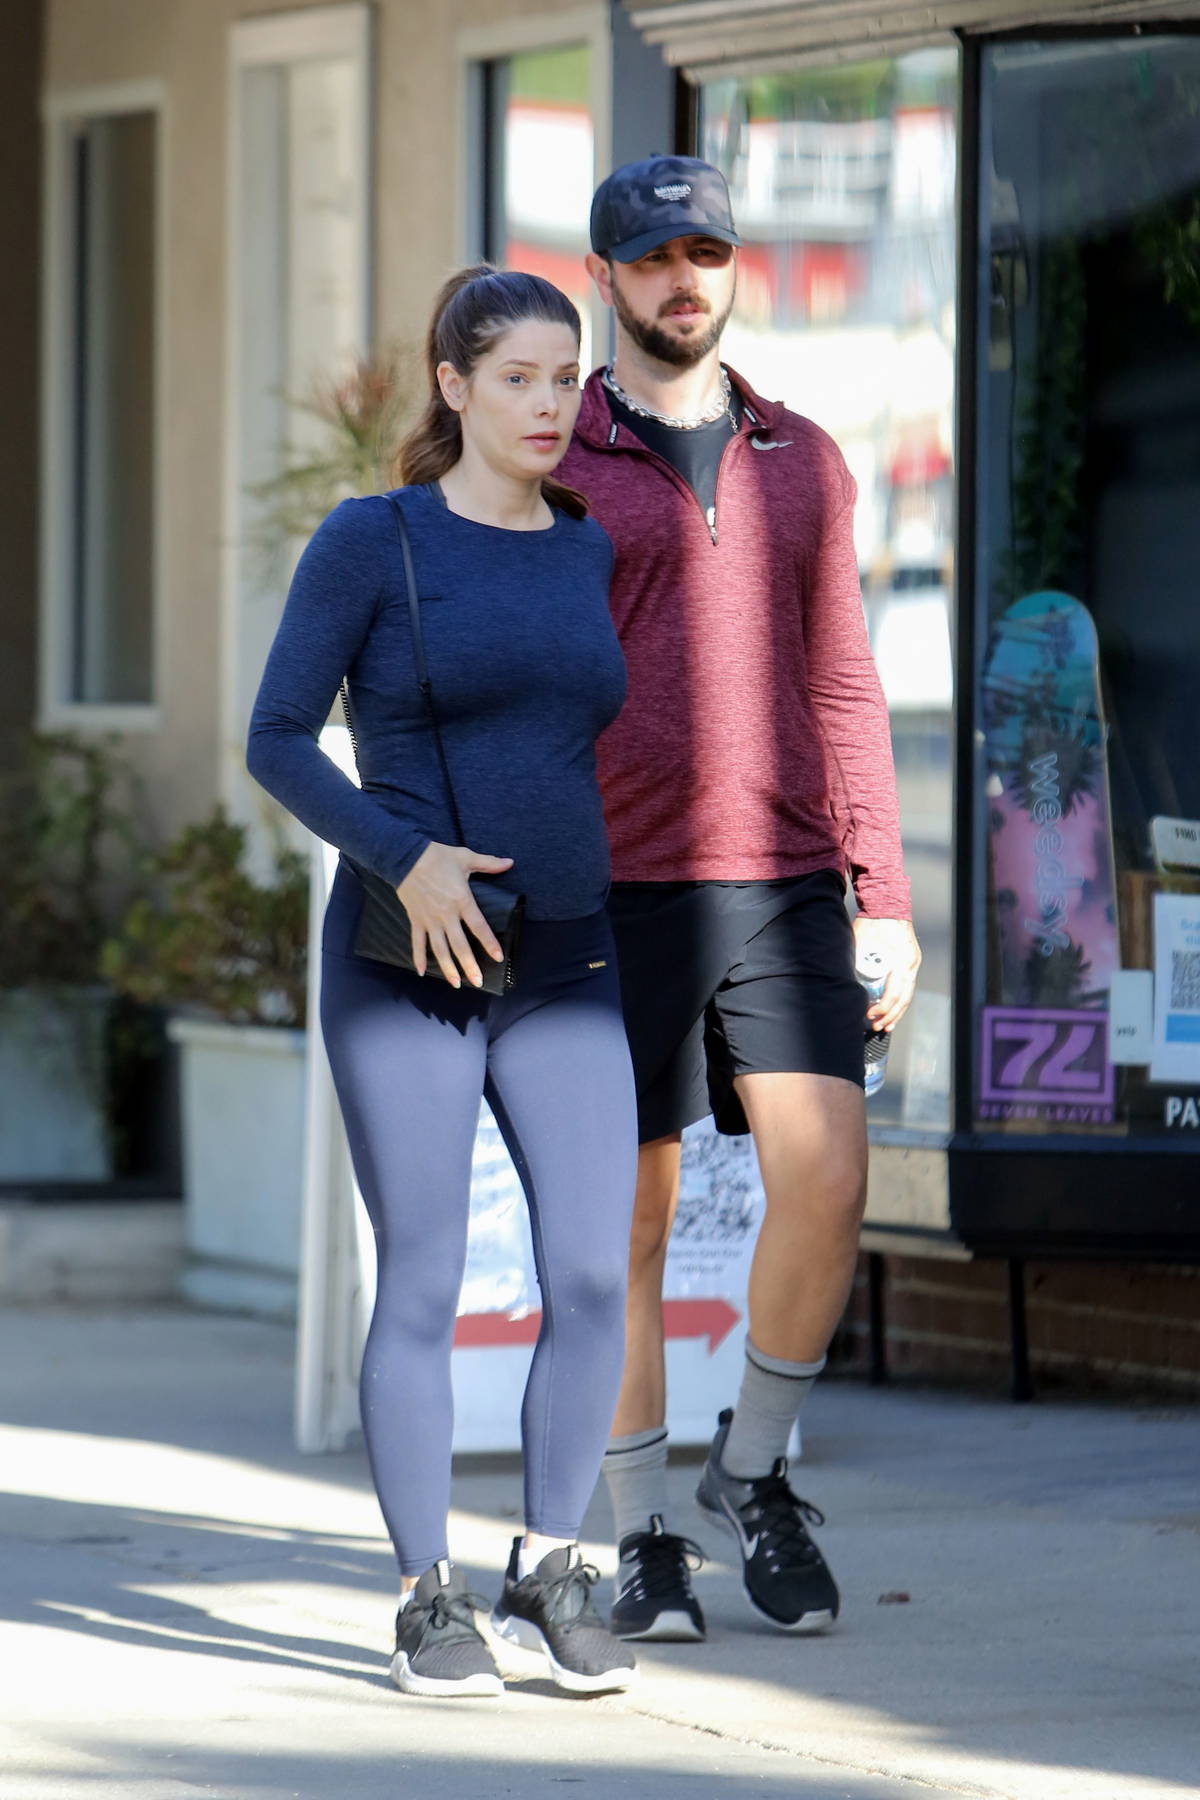 Jennifer Garner shows off her toned legs in navy blue leggings while out  for a walk